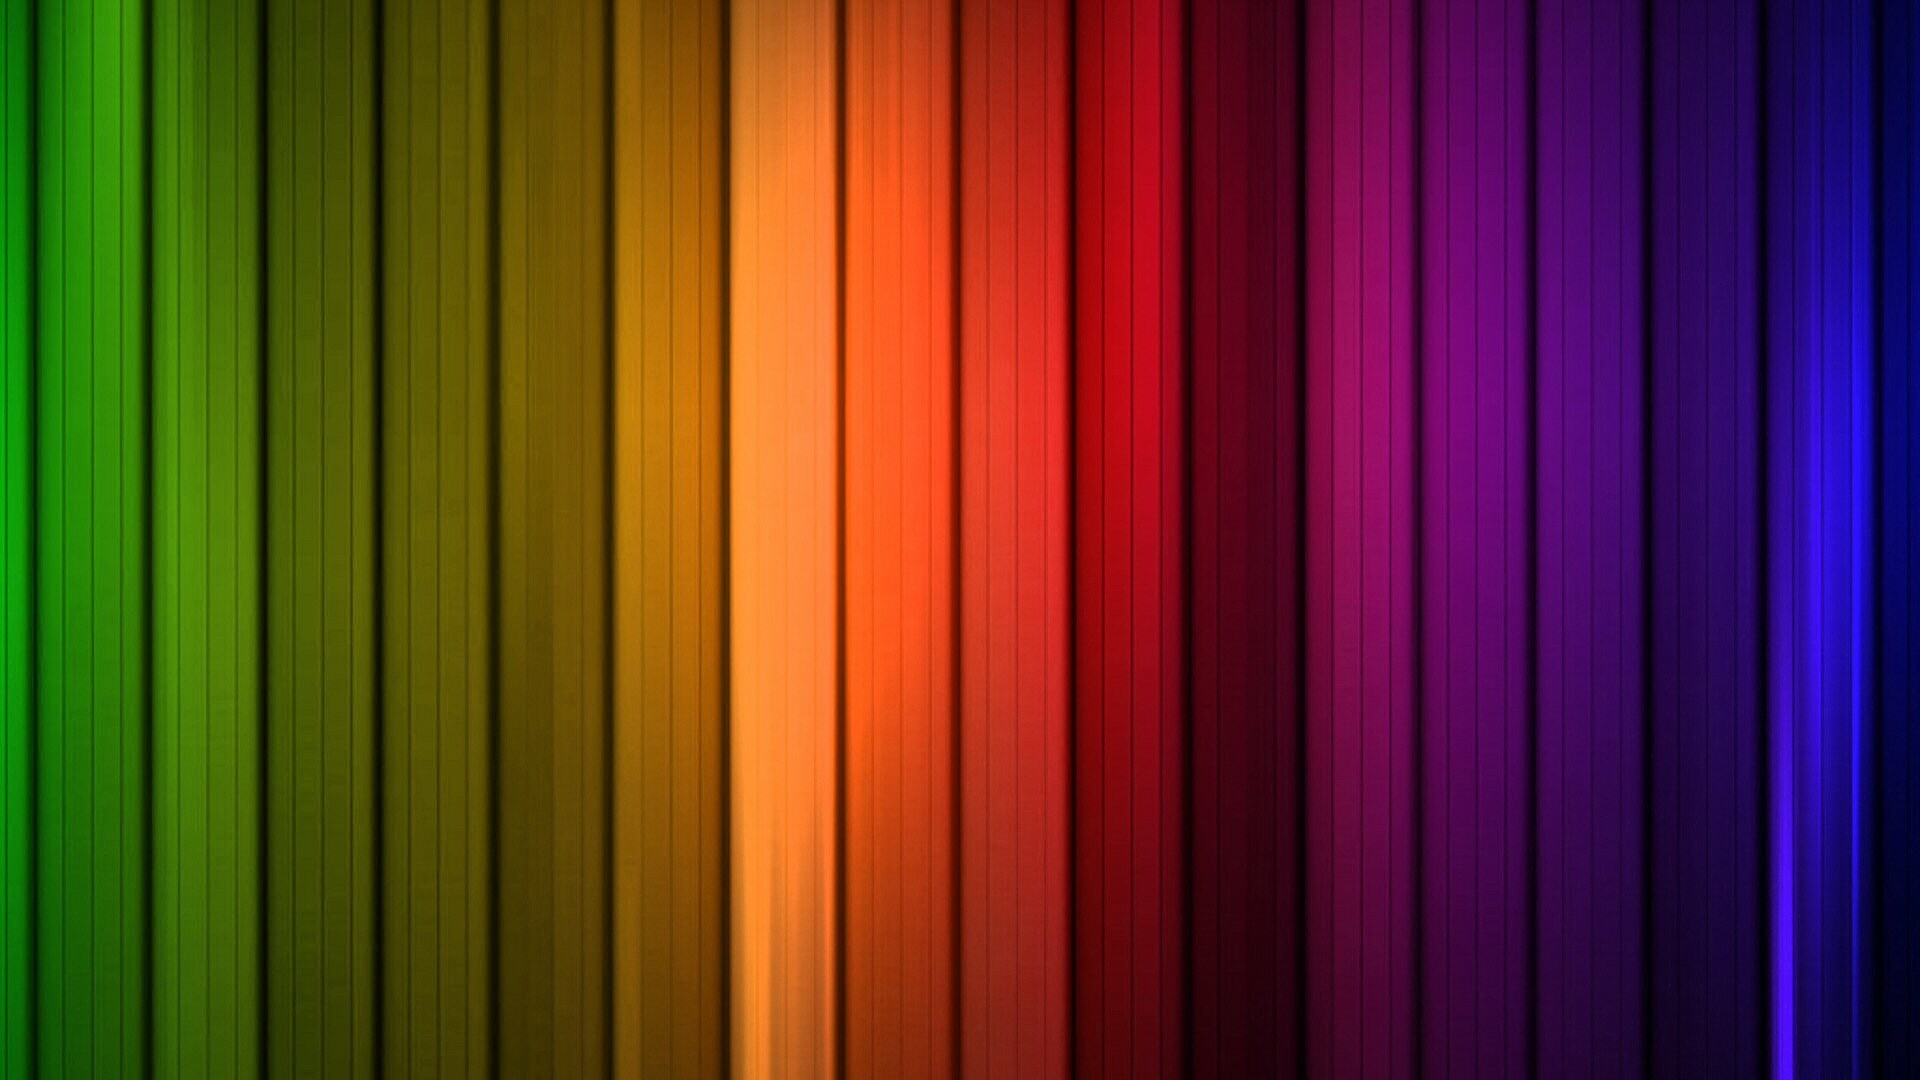 Rainbow Colors: The art that based on the use of the regular shapes. 1920x1080 Full HD Background.